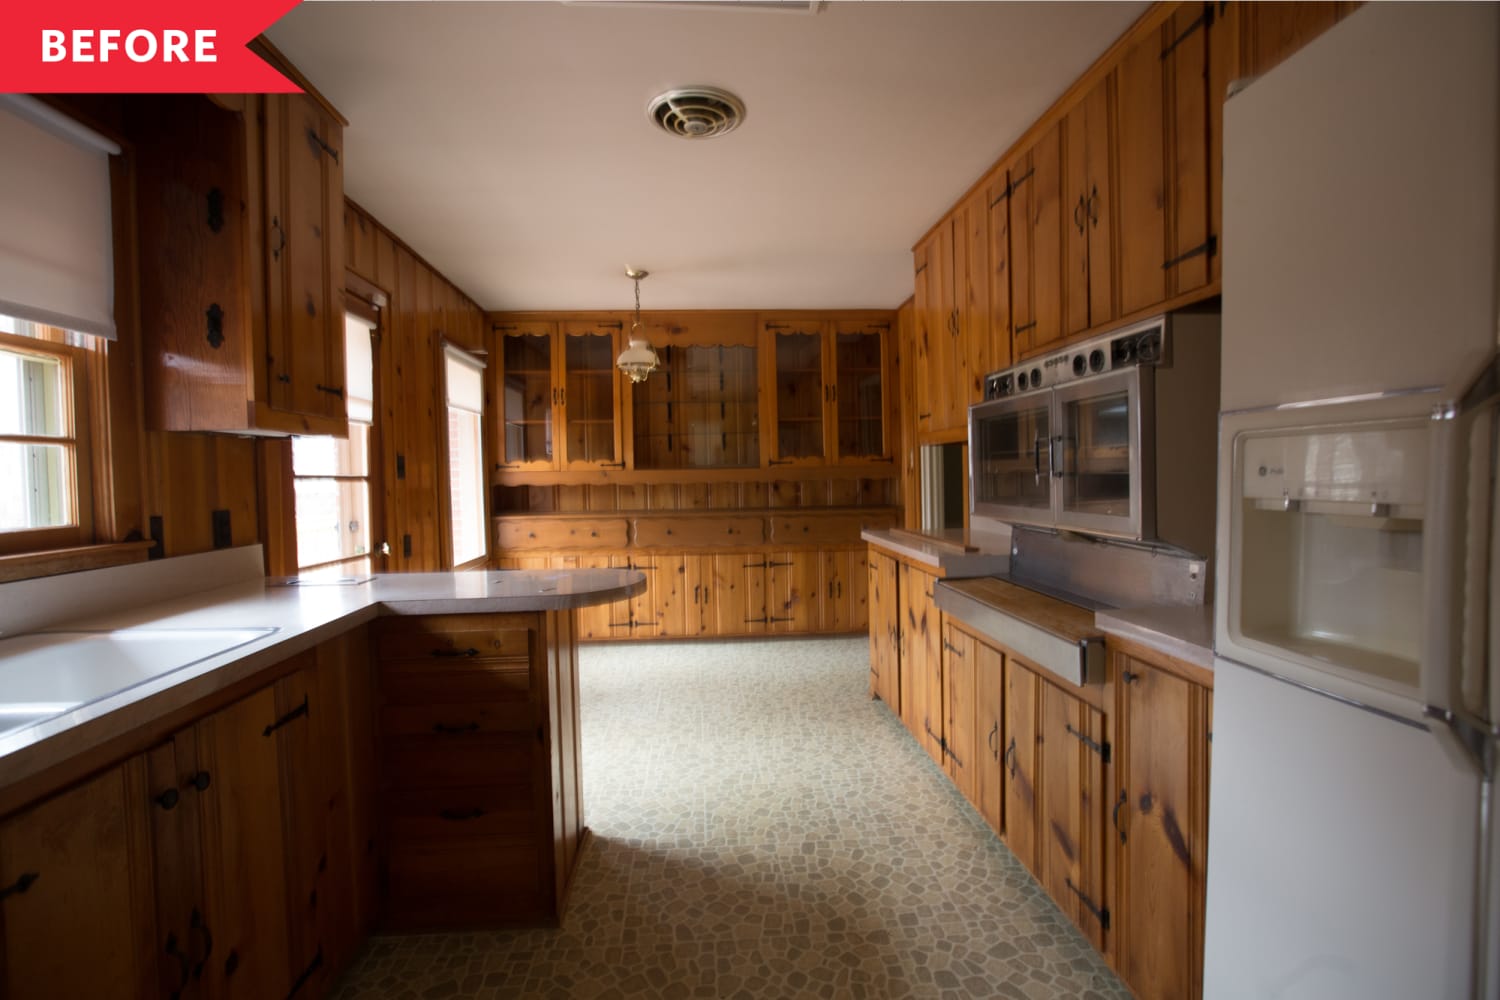 Flipboard Before After This Kitchen With Endless Knotty Pine